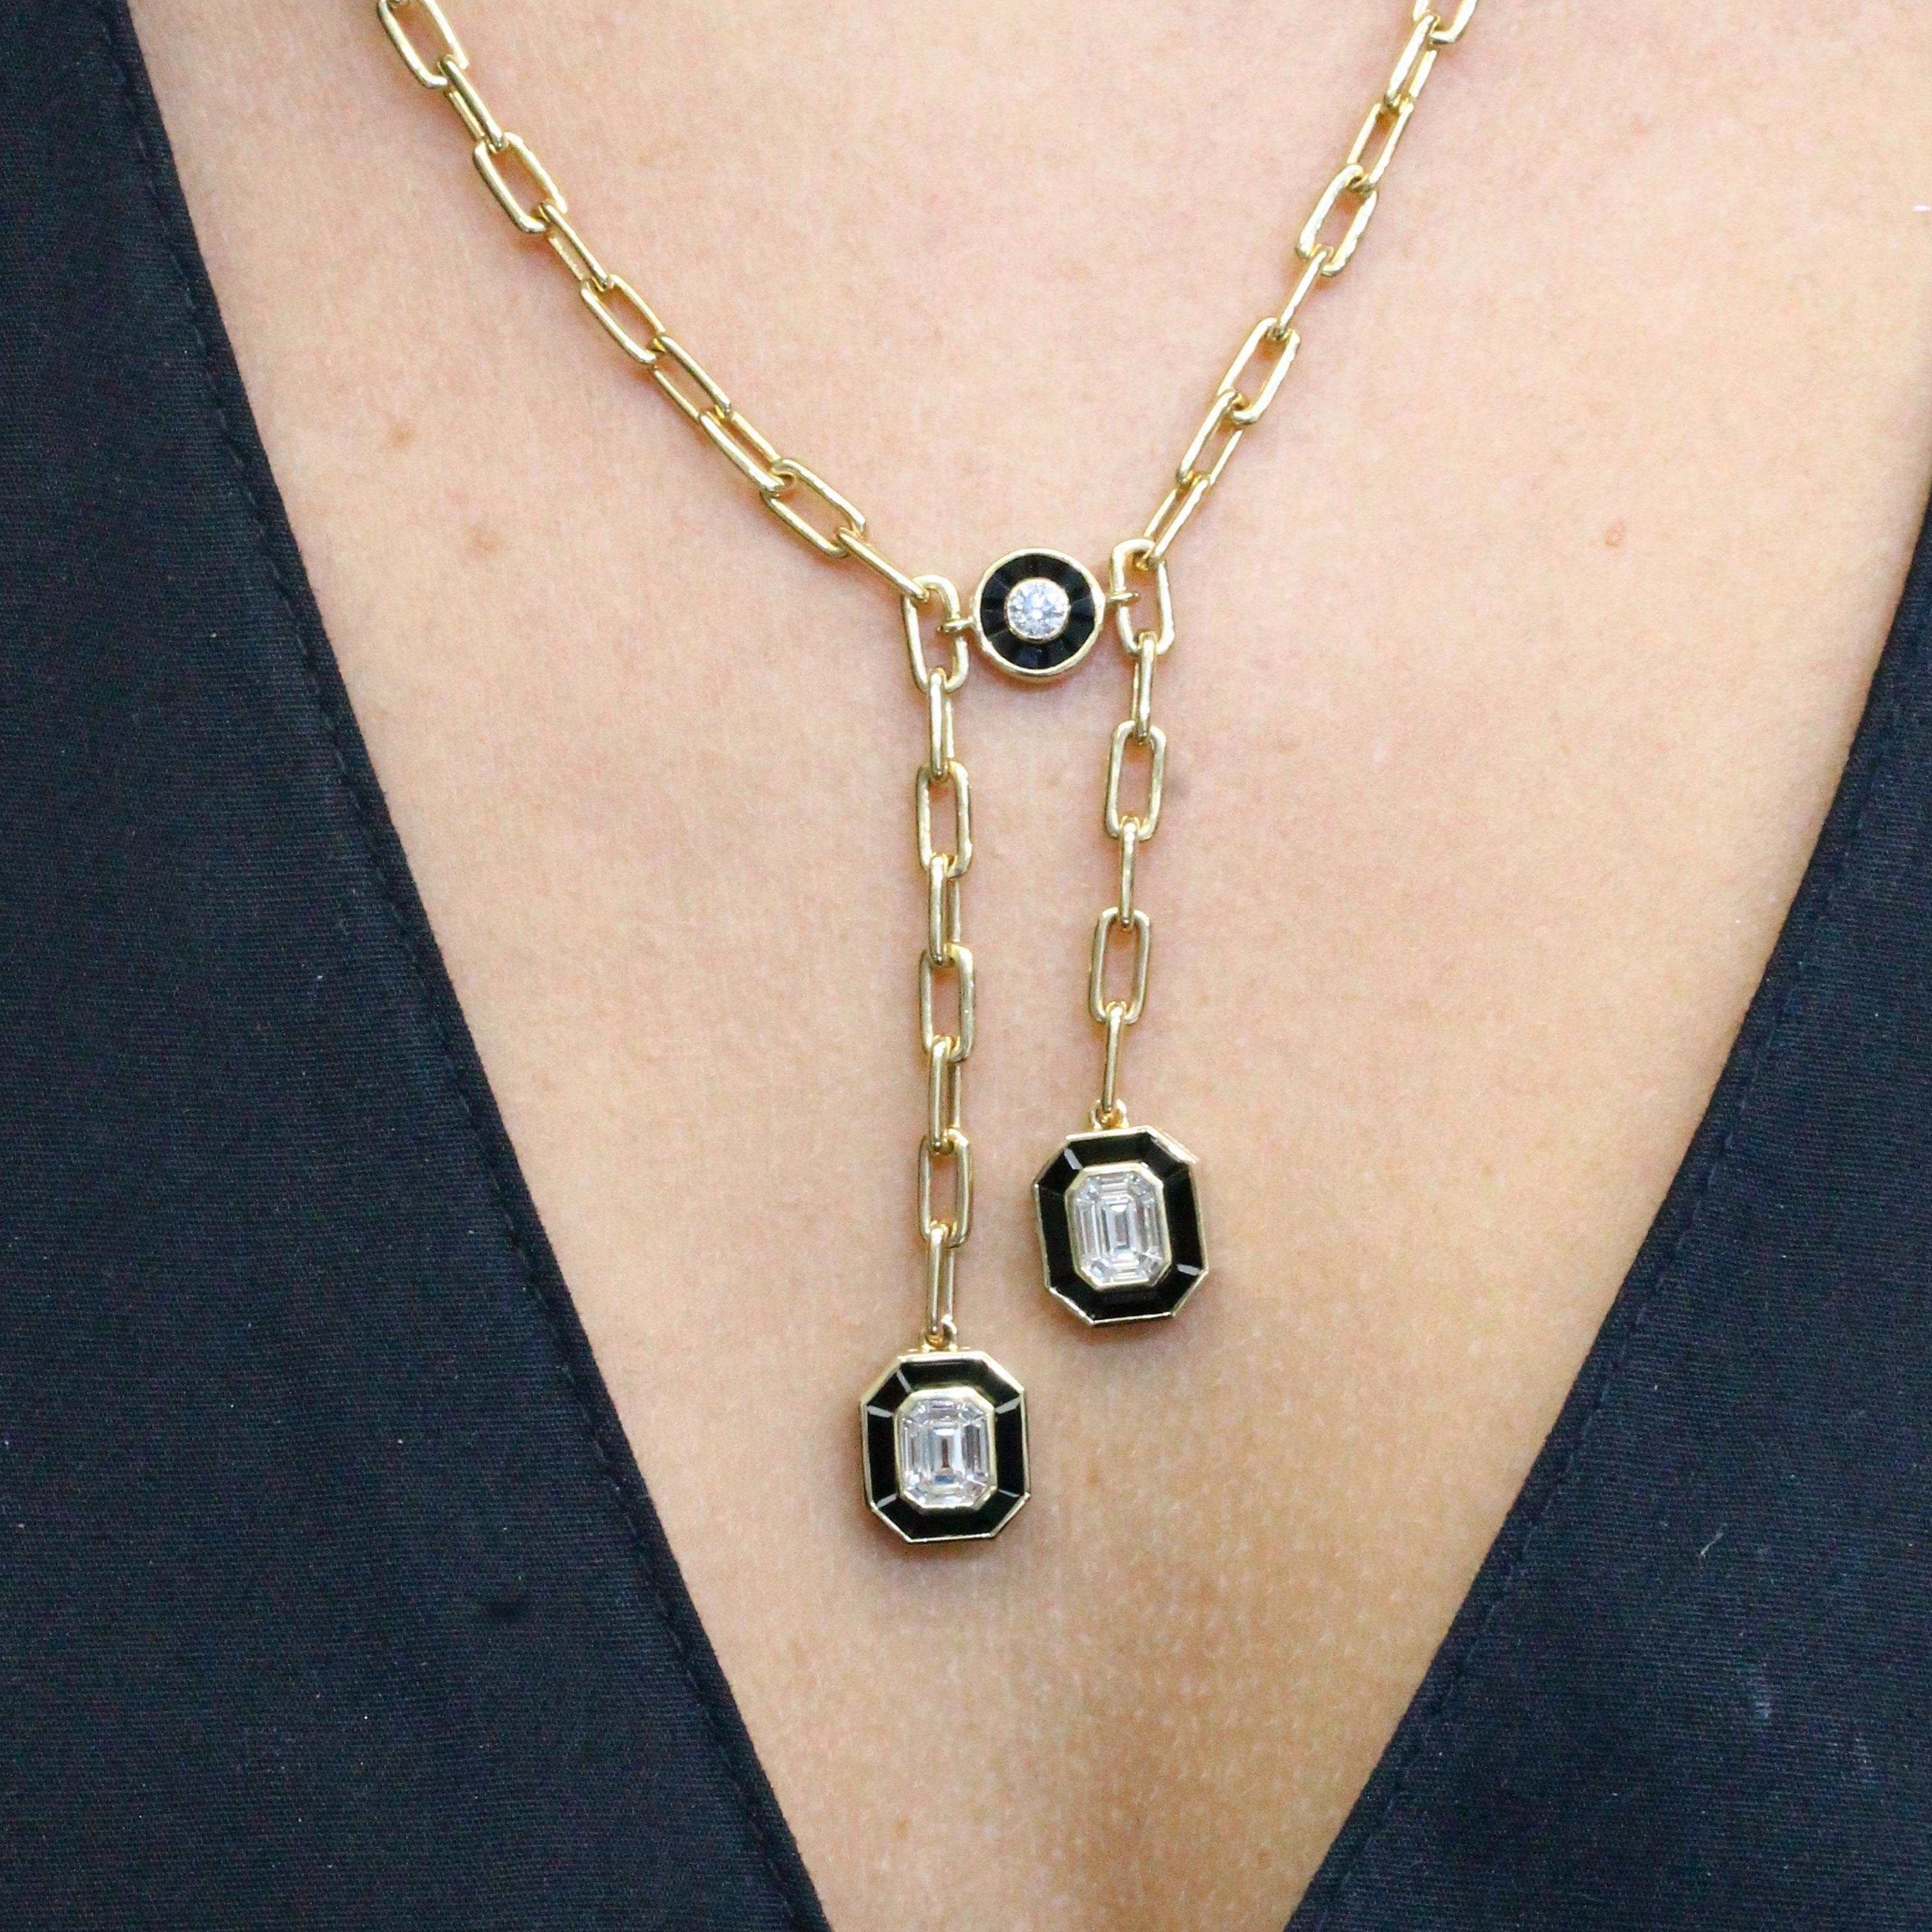 One of a kind show-stopping Lariat Necklace from the Mondrian collection. Featuring (2) Invisible-Set Emerald Diamond Centers made up of Baguettes, as well as a Bezel-Set Round Diamond framed in Black Onyx, in an 18K Yellow Gold Art-Deco setting.